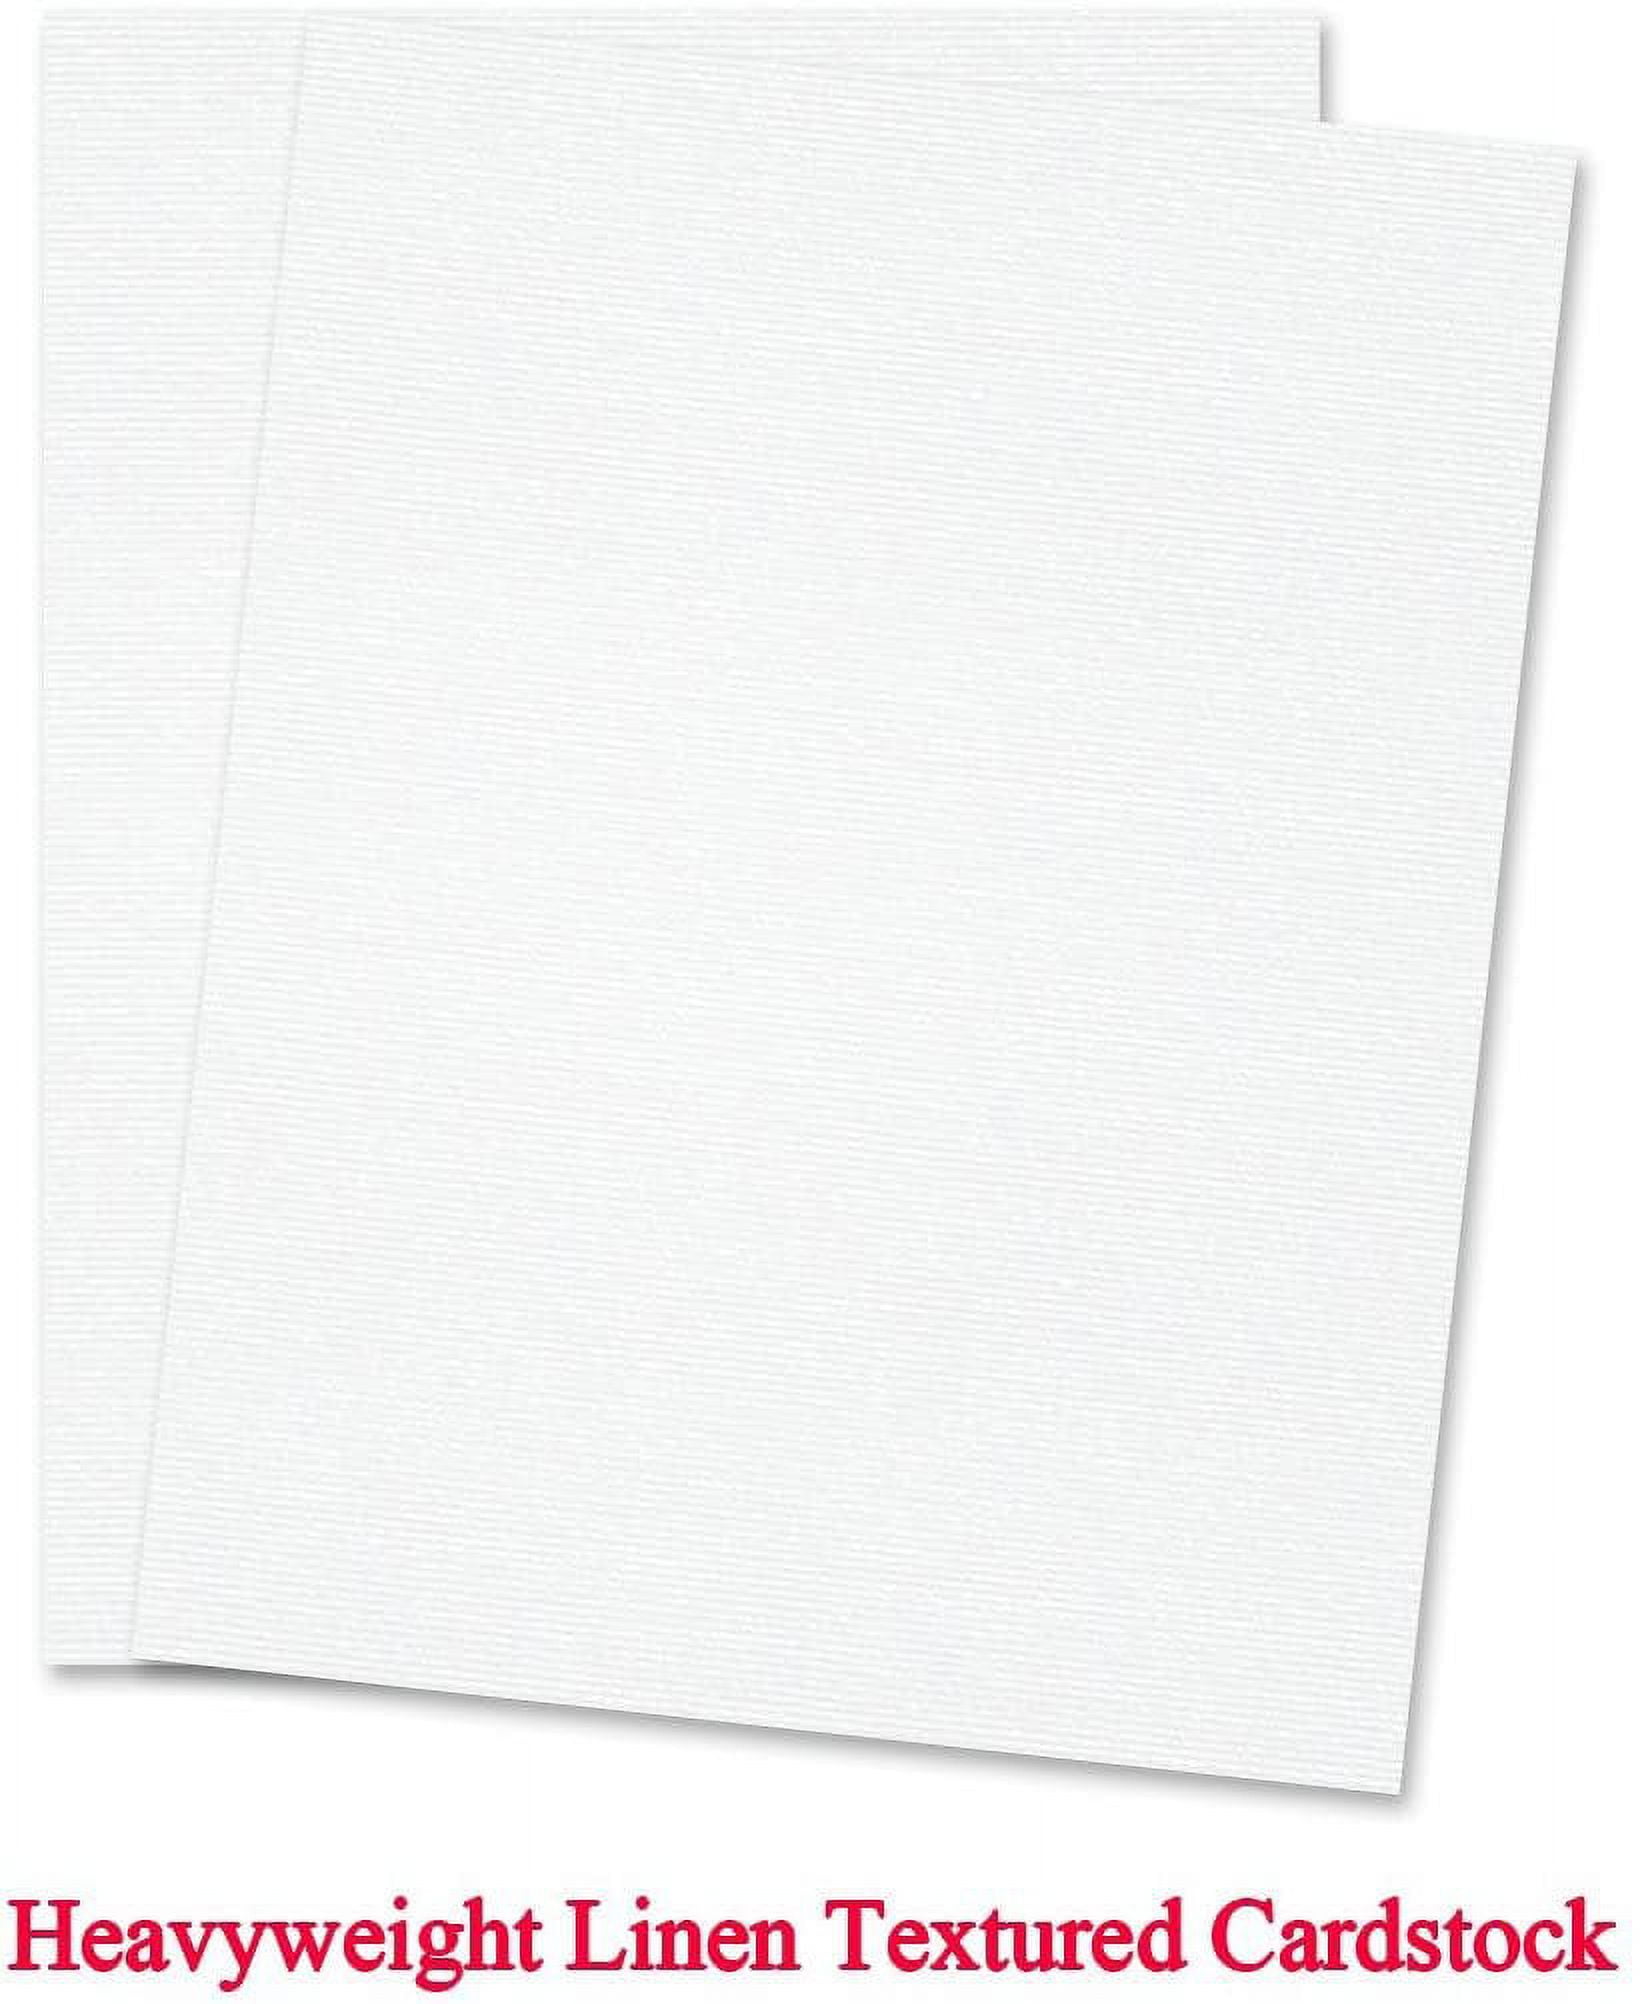 LUX 80 lb. Cardstock Paper, 8.5 x 11, Bright White, 500 Sheets